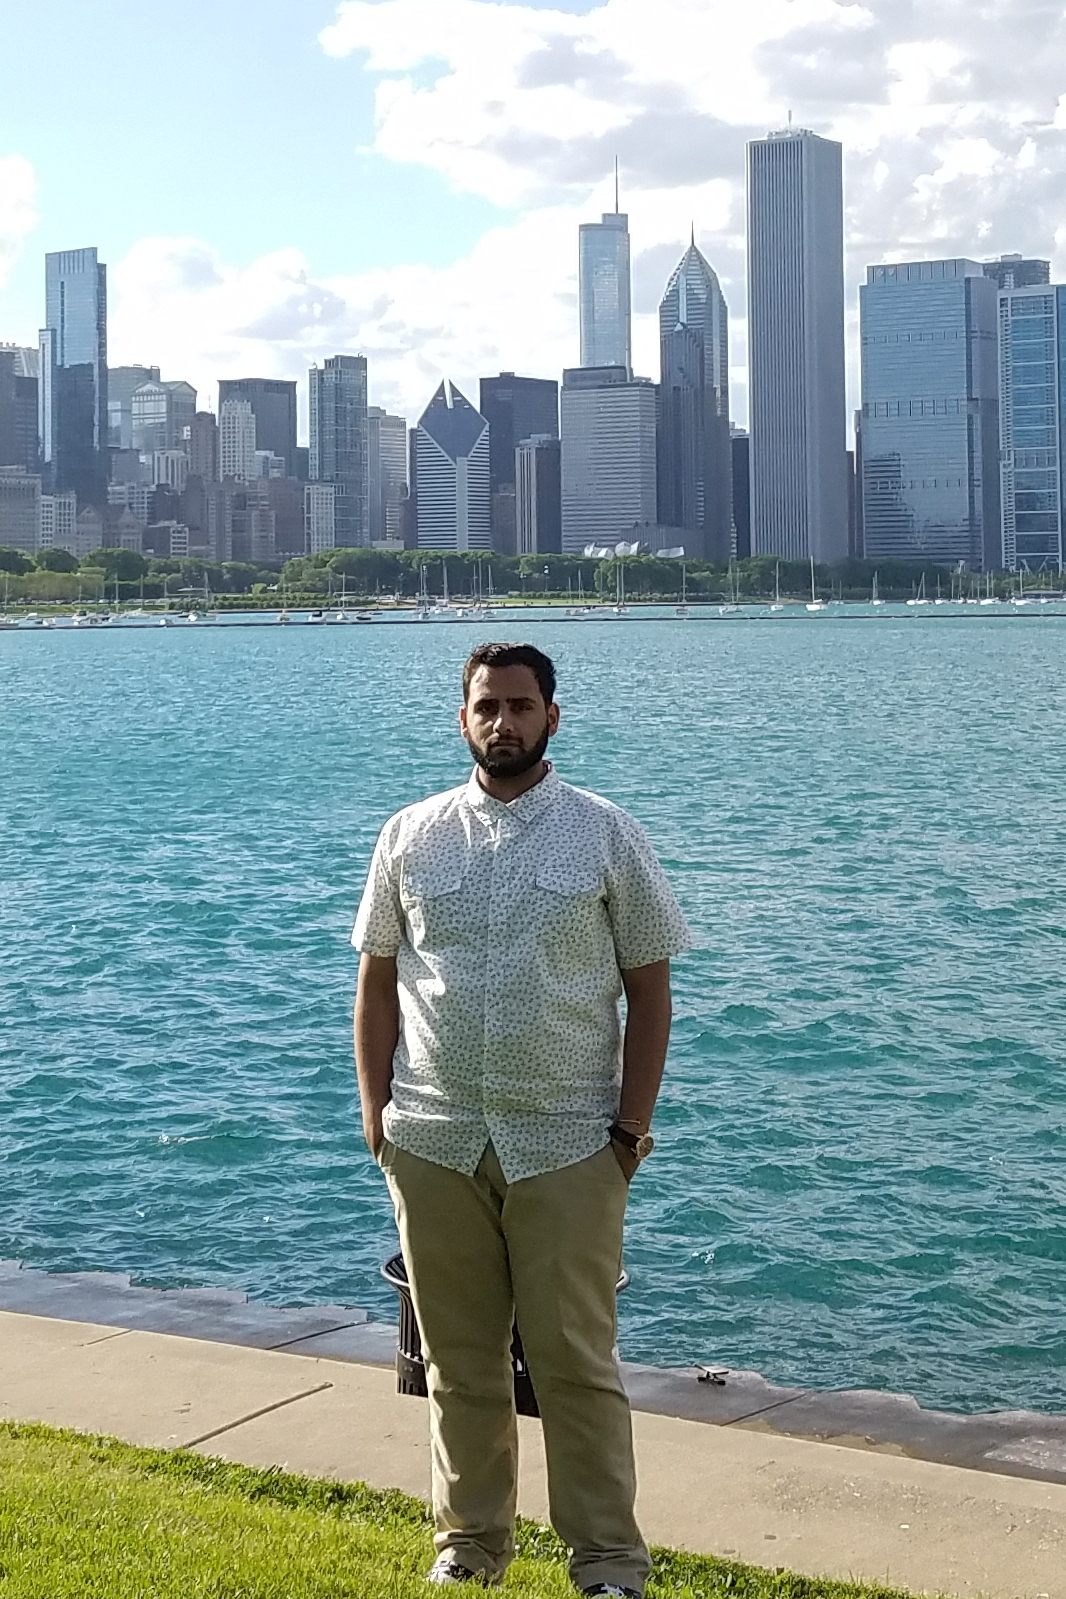 TouroCOM-Middletown's Nasir Malim was selected as a summer intern for the University of Chicago’s Islamic Bioethics program, conducted through its Initiative on Islam and Medicine.